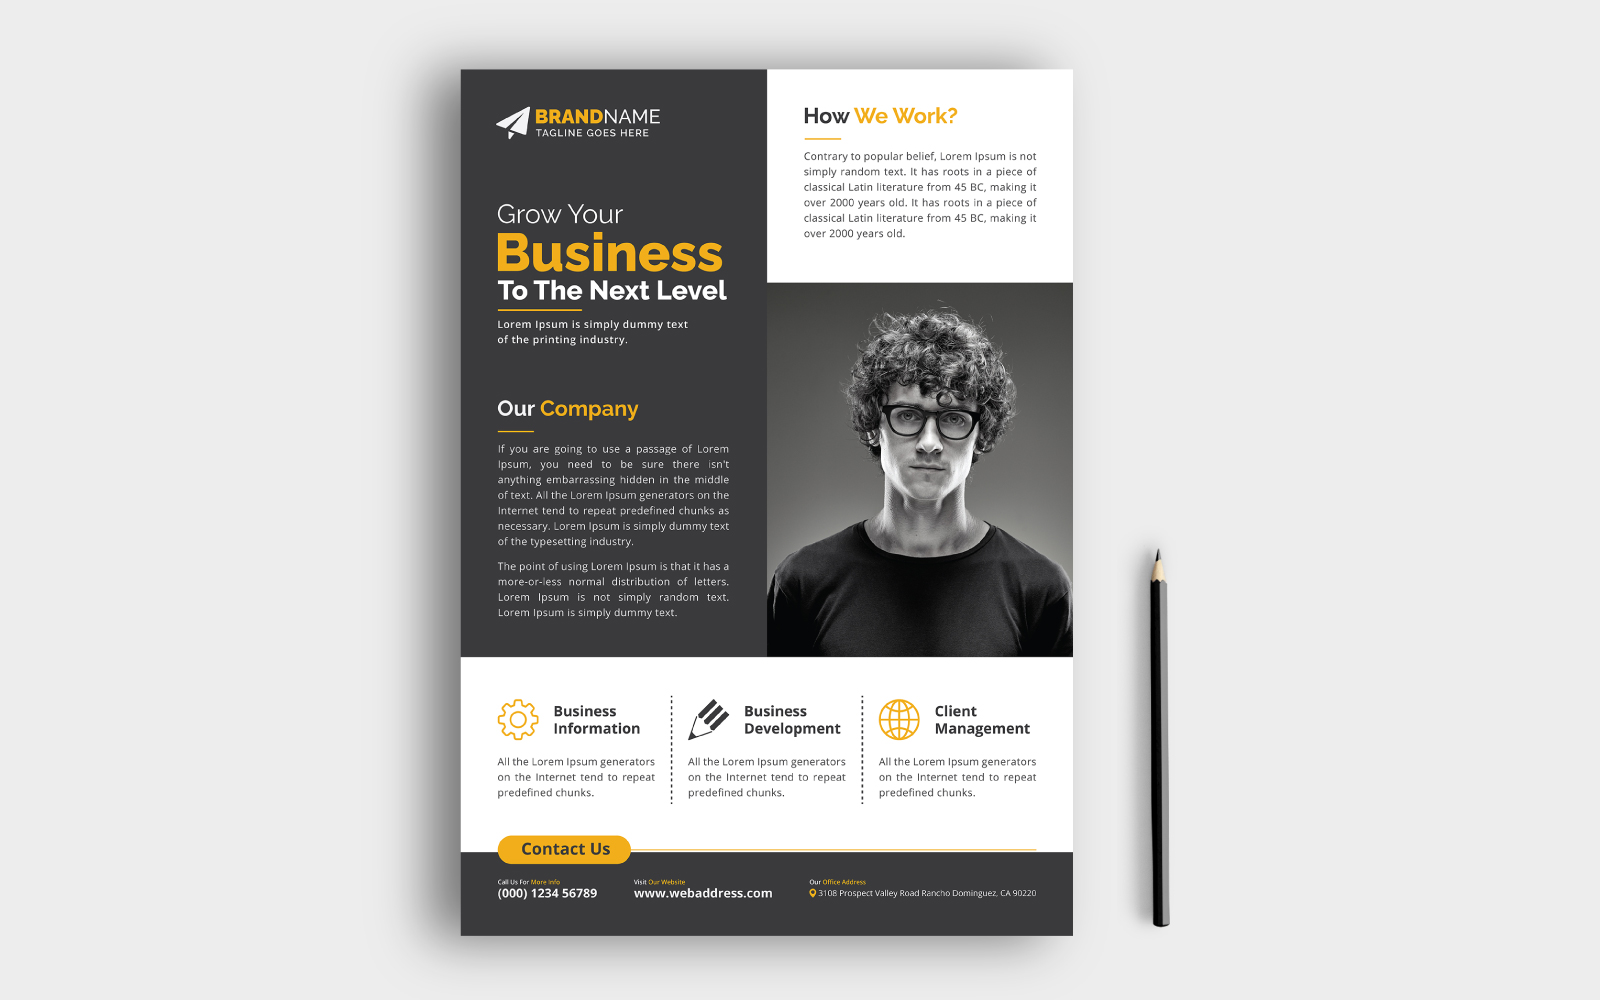 Minimalist Creative Corporate Business Flyer Template with Red, Blue, Yellow, Green Color Variations